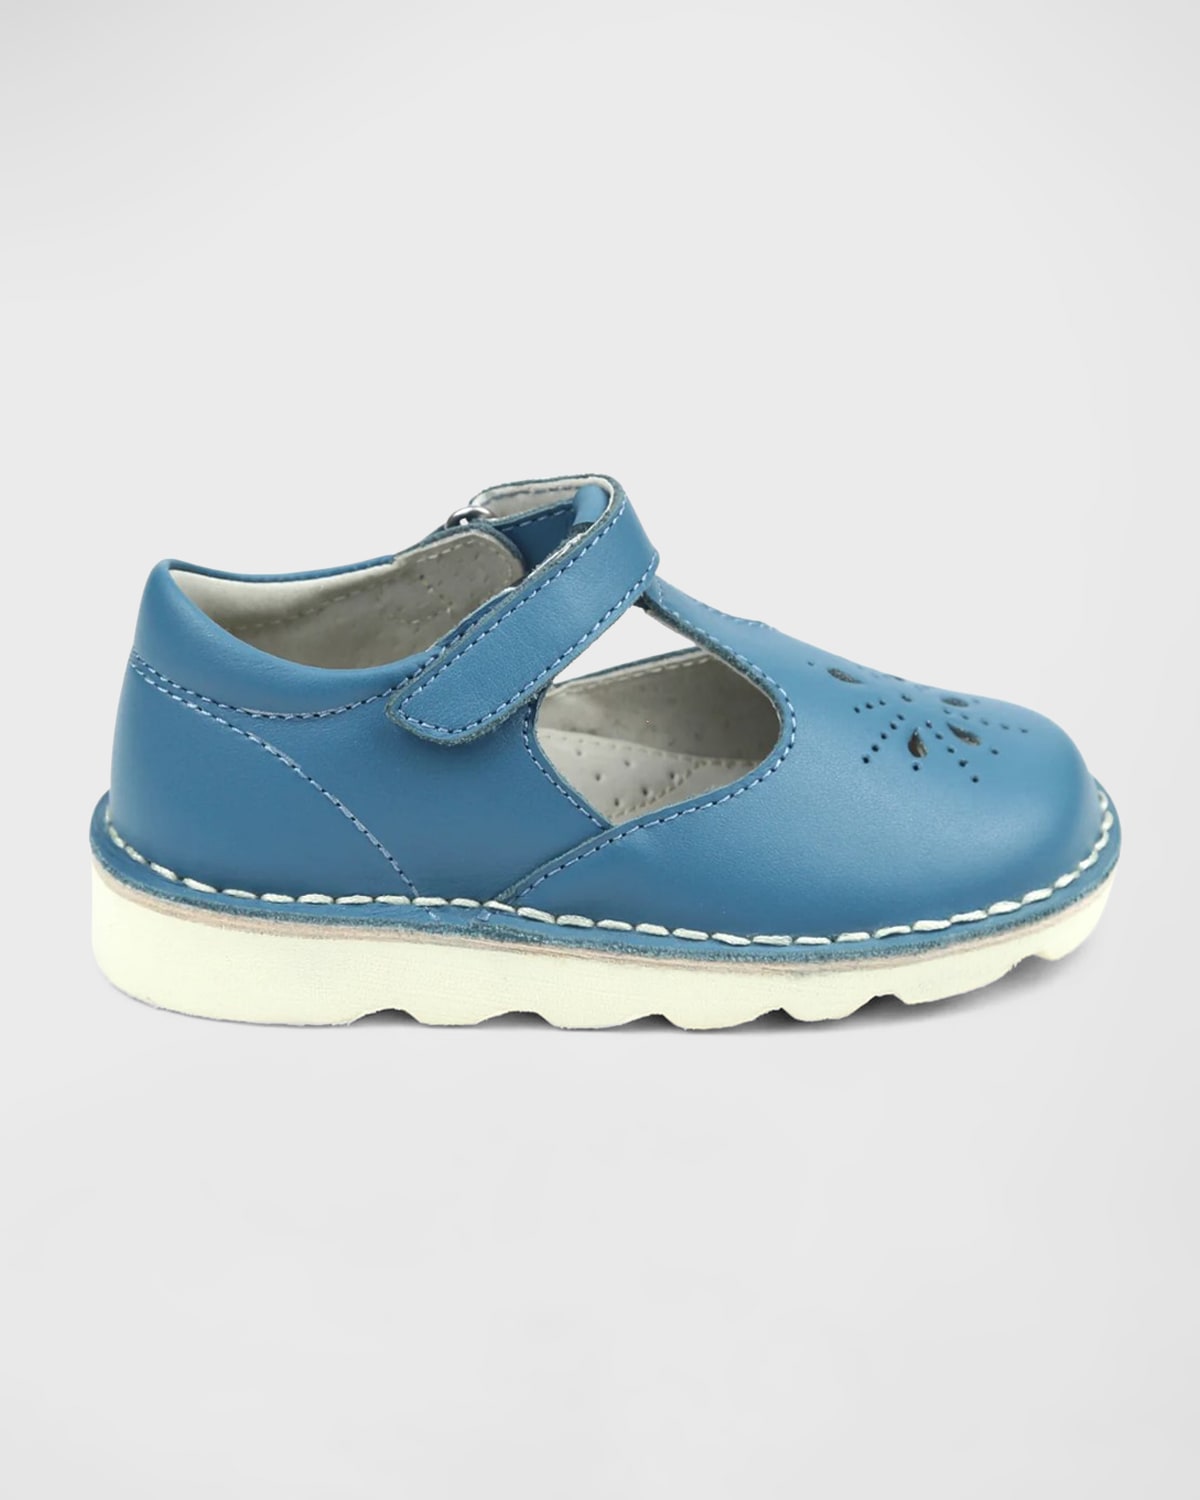 L'amour Shoes Girl's Alix Leather Cutout Mary Jane, Baby/toddler/kid In Blue